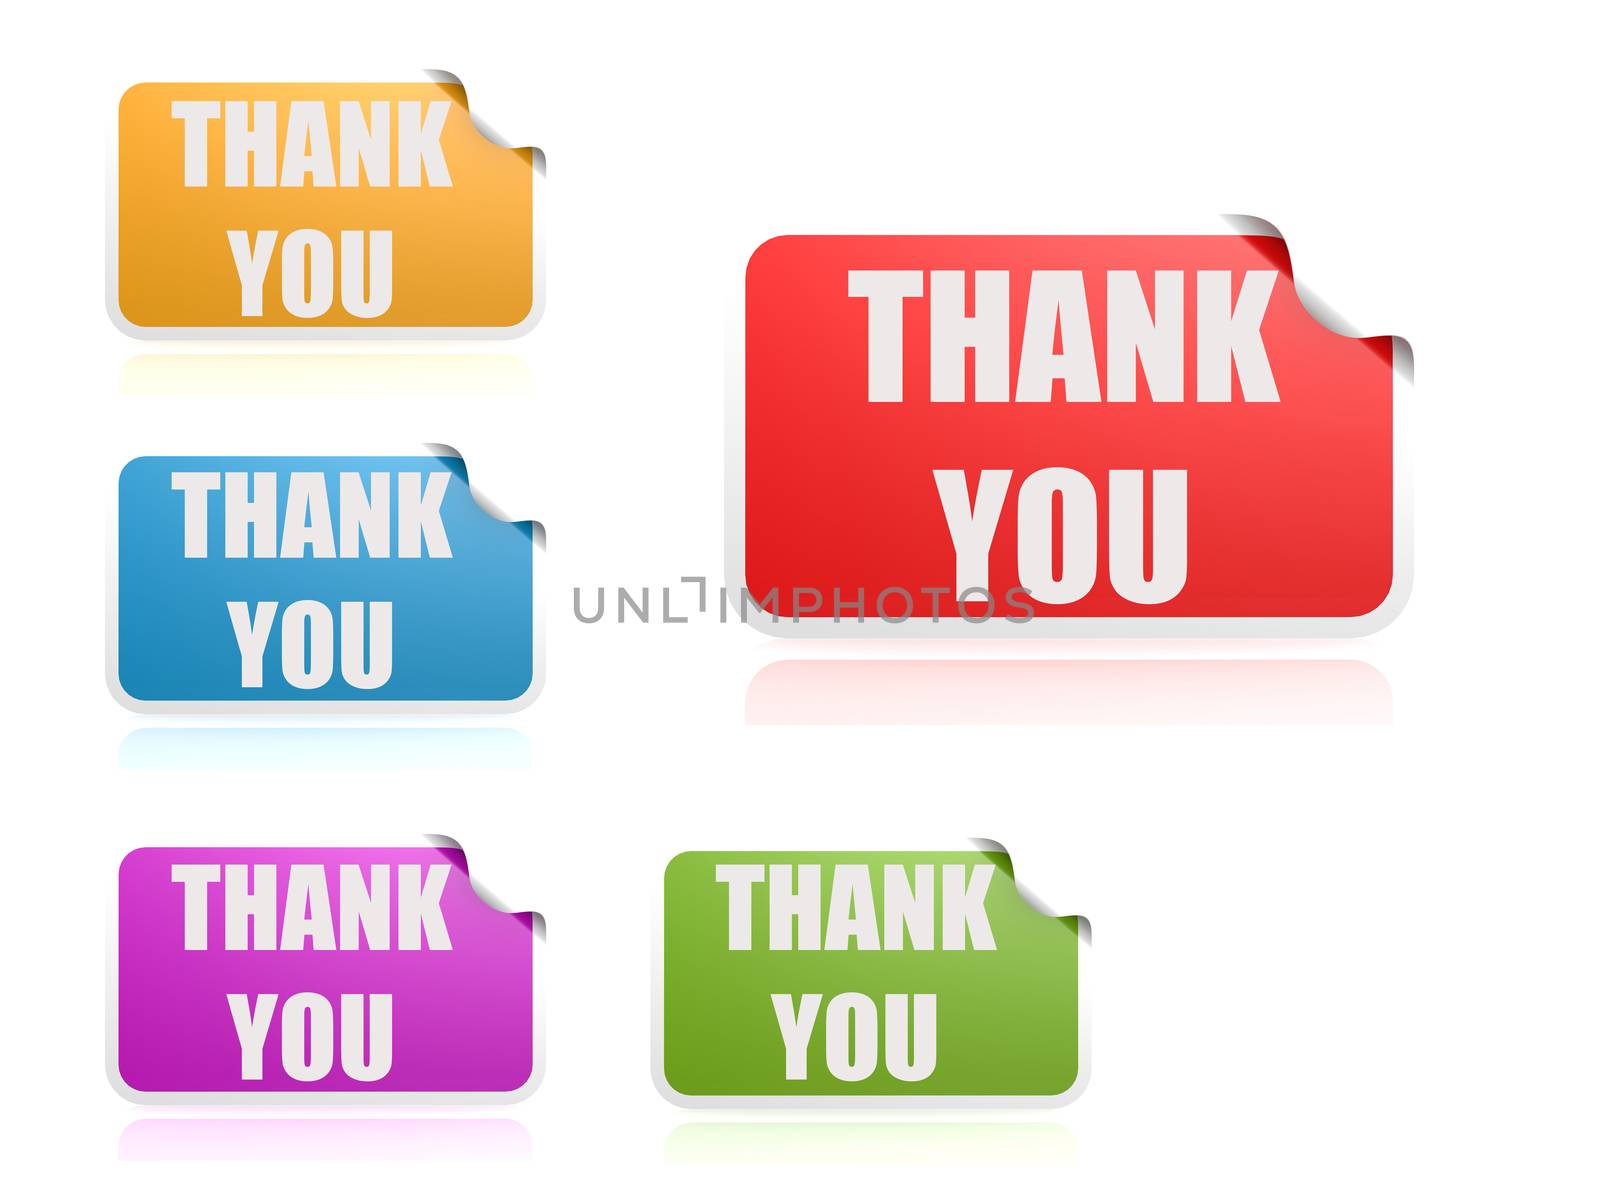 Thank you color label image with hi-res rendered artwork that could be used for any graphic design.